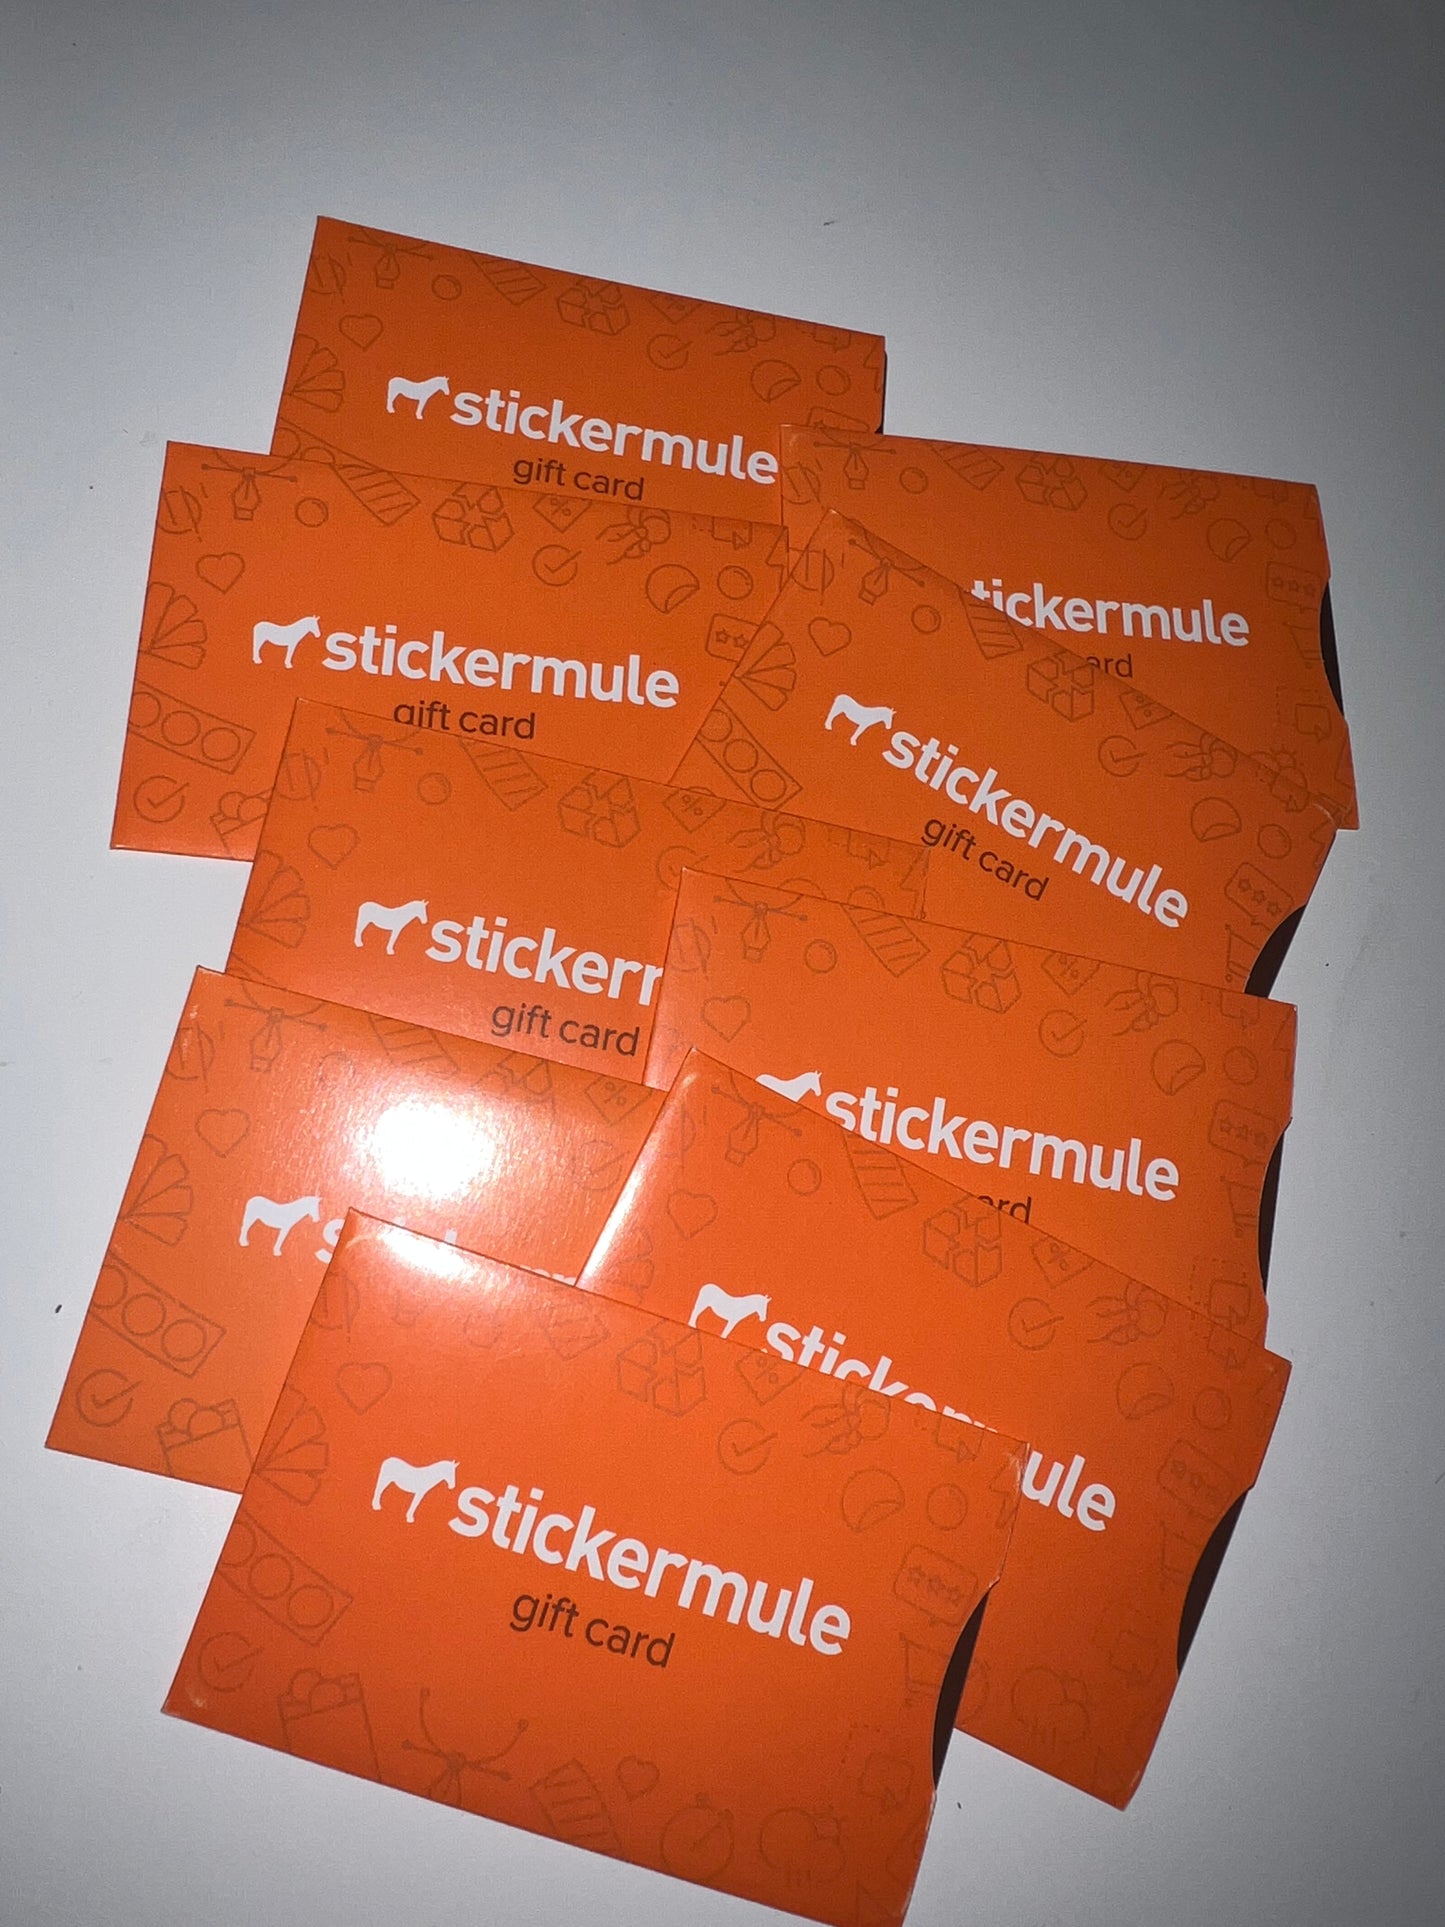 Stickermule $100 Giftcard